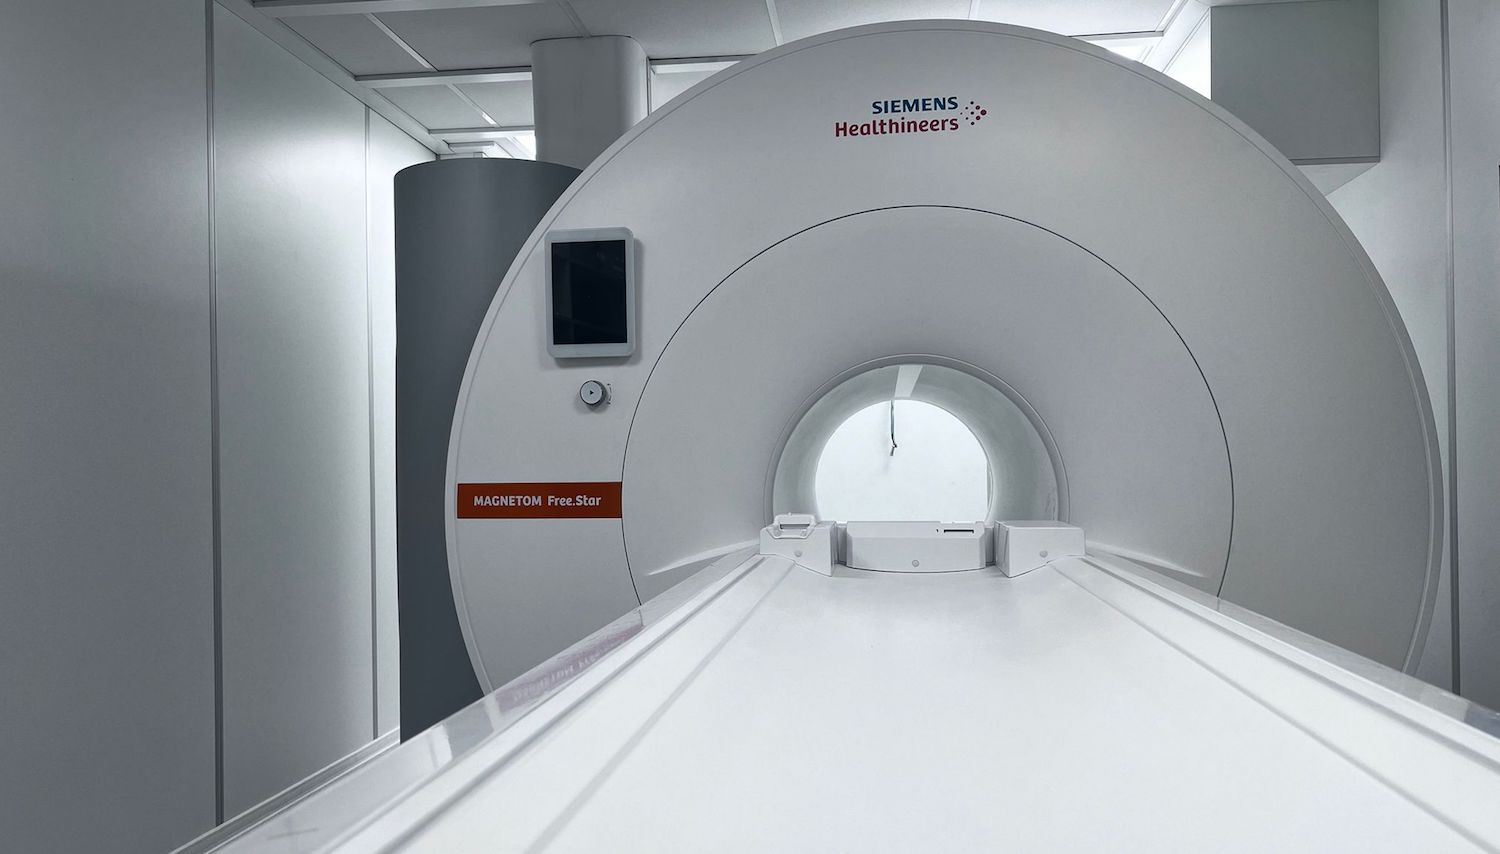 Siemens Healthineers announces the set-up of the first MAGNETOM Free.Star in Romania at the ARHIMED RADIOLOGY centre in Iași